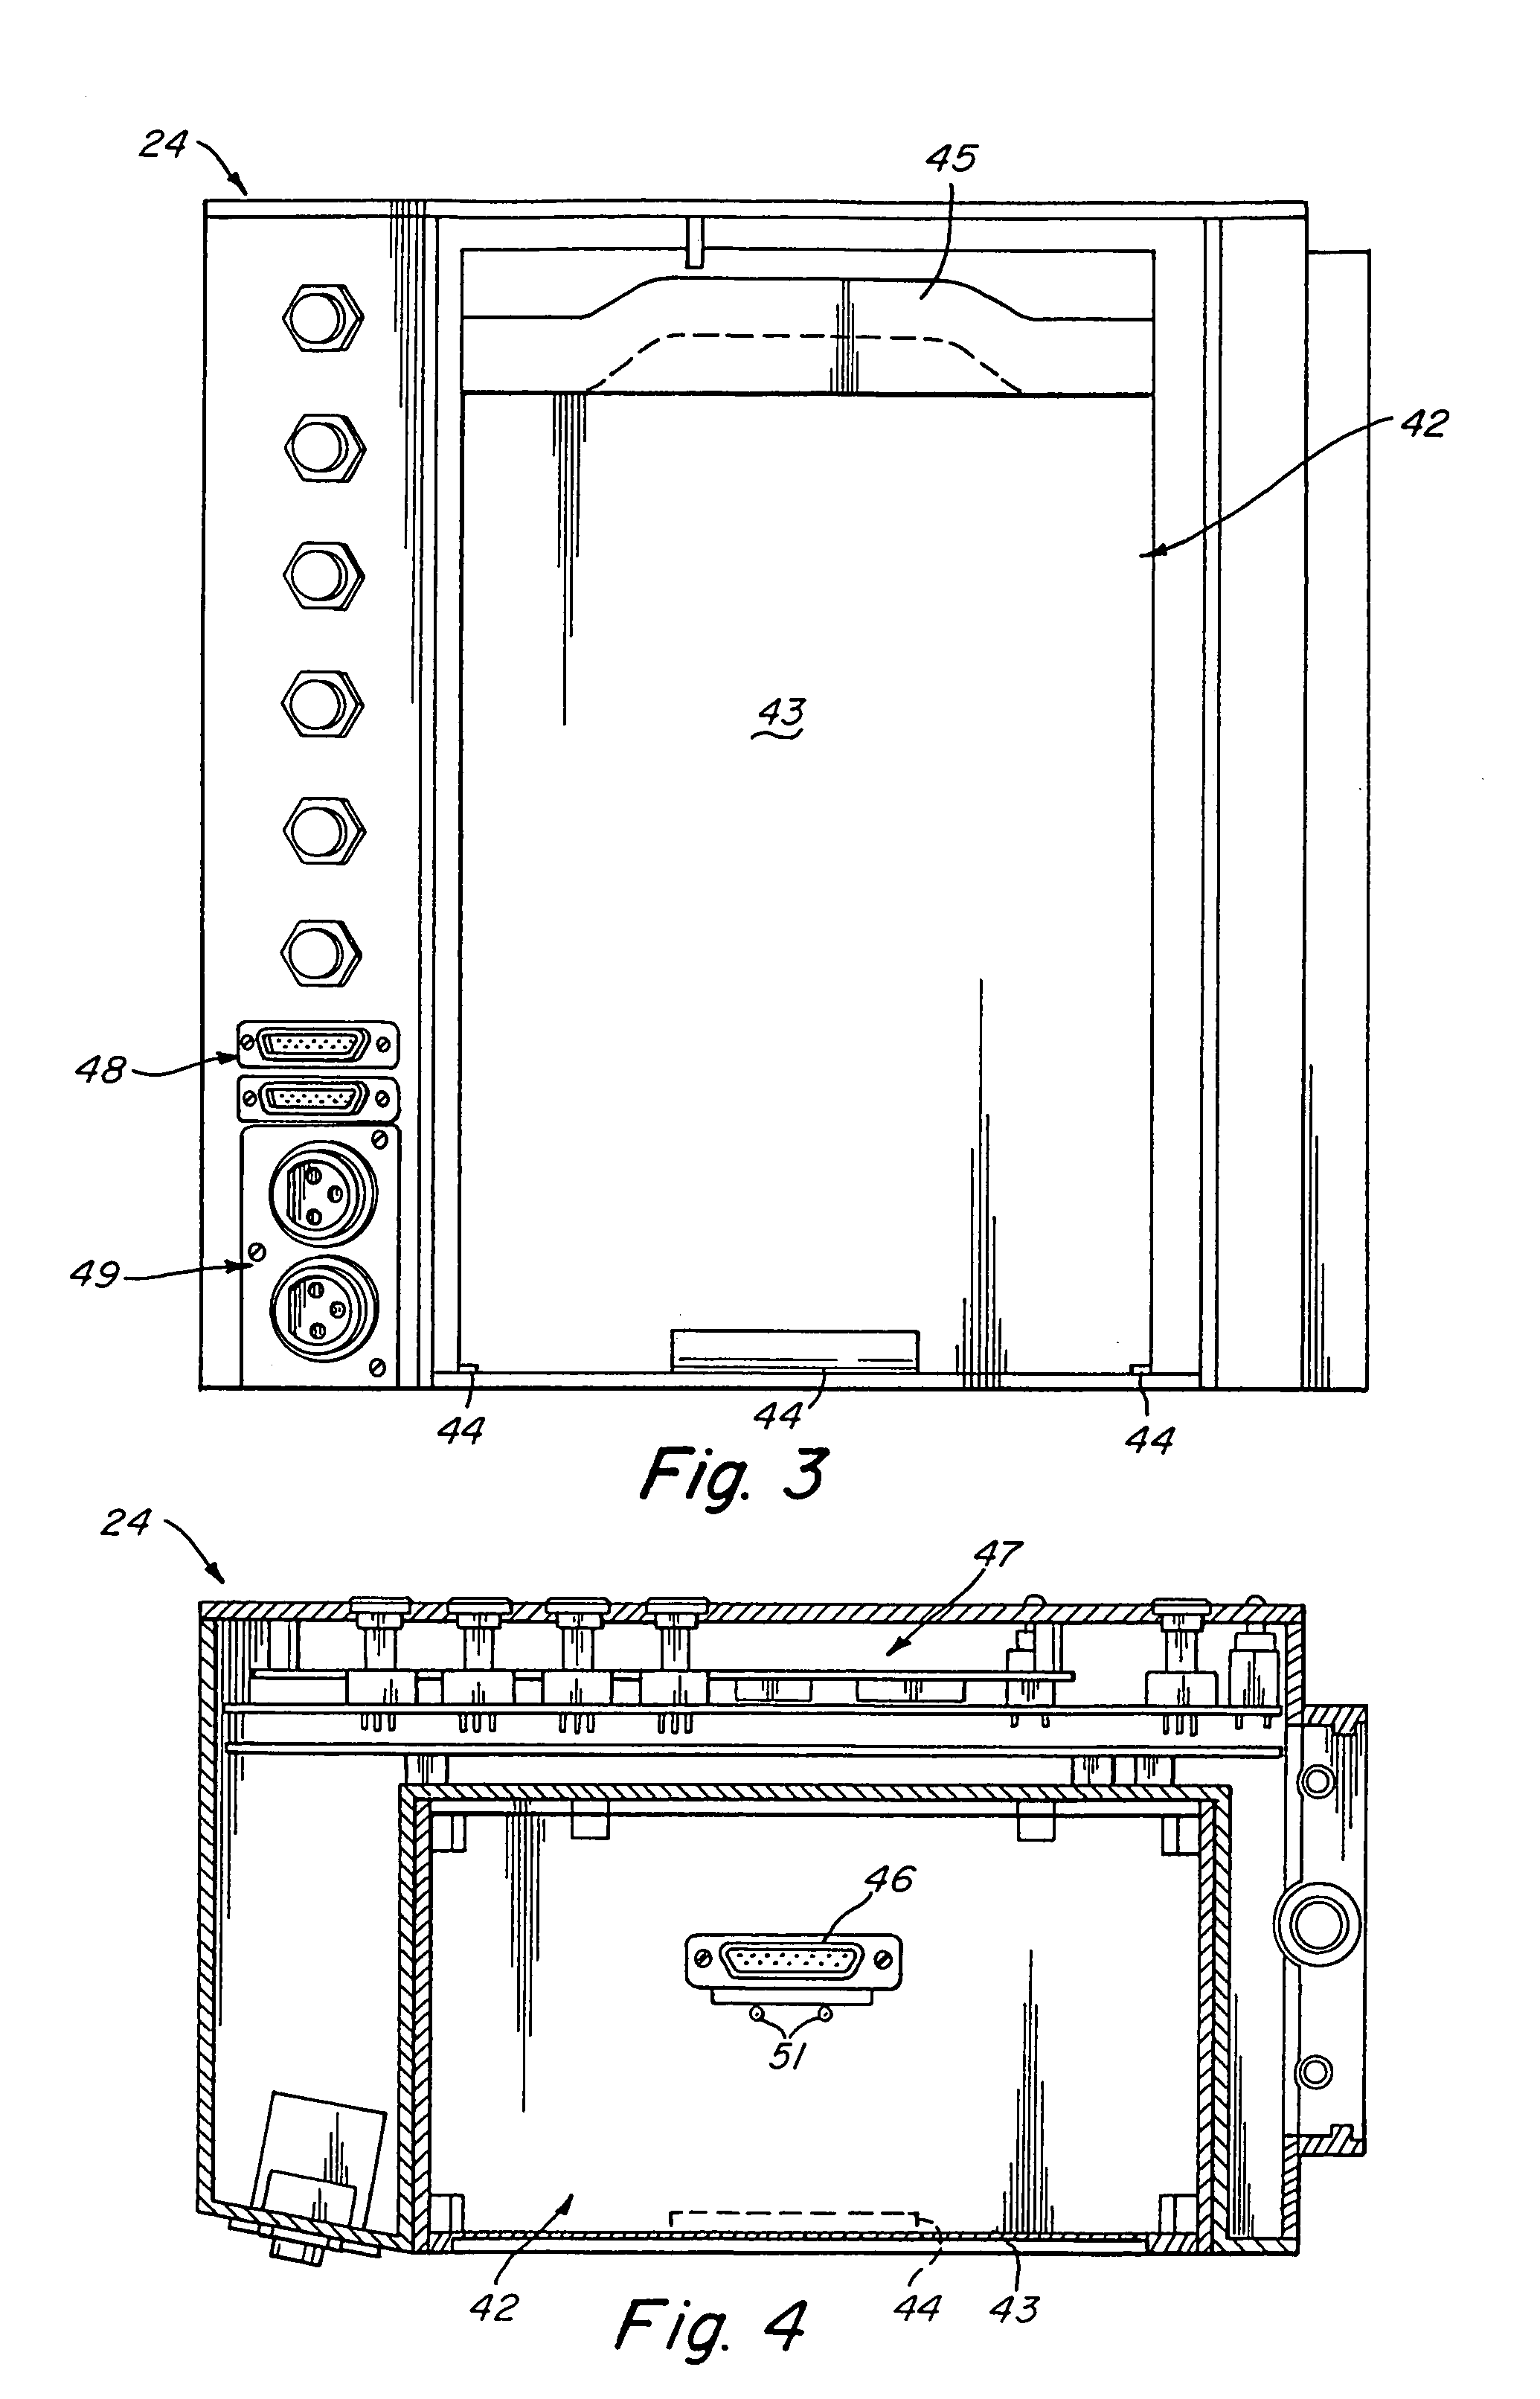 Motion picture recording device using digital, computer-readable non-linear media